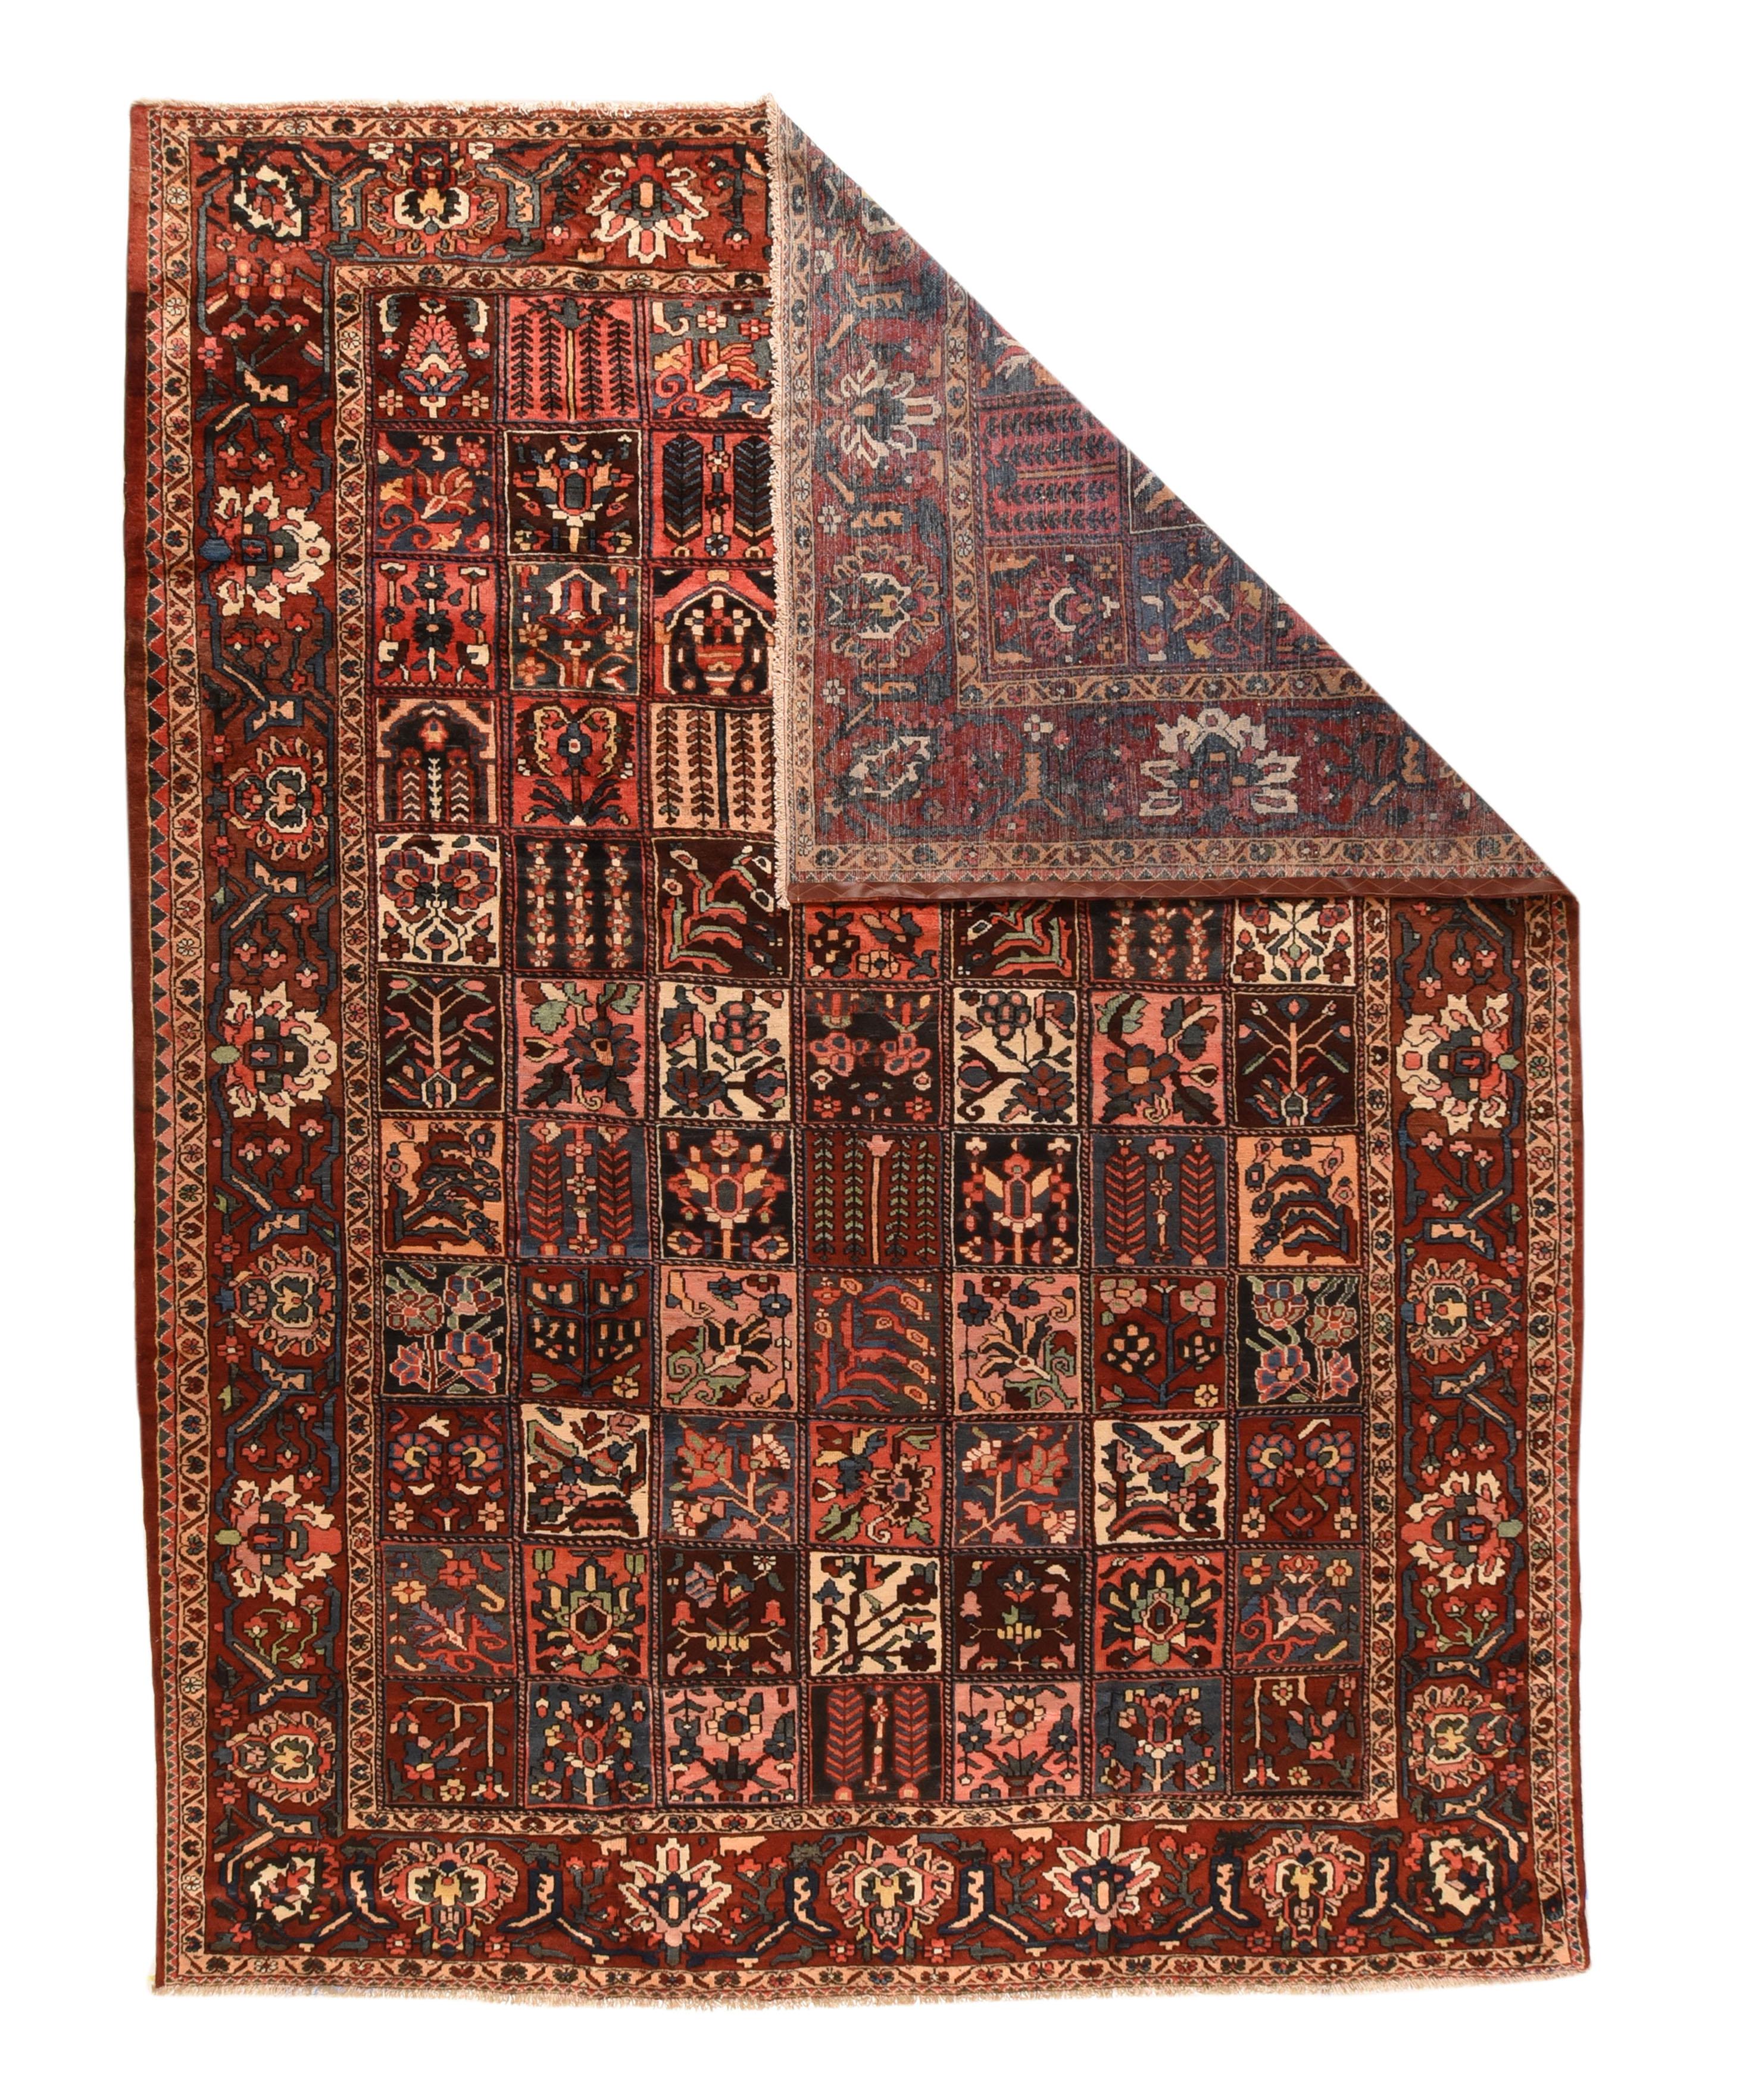 This central Persian Chahar Mahal area village carpet shows a seven by elven “garden” windowpane panel design with mihrabs, weeping willows, flowering vases, twinned feathery fronds and blossoming stems, with grounds of cream, navy, rust-red, green